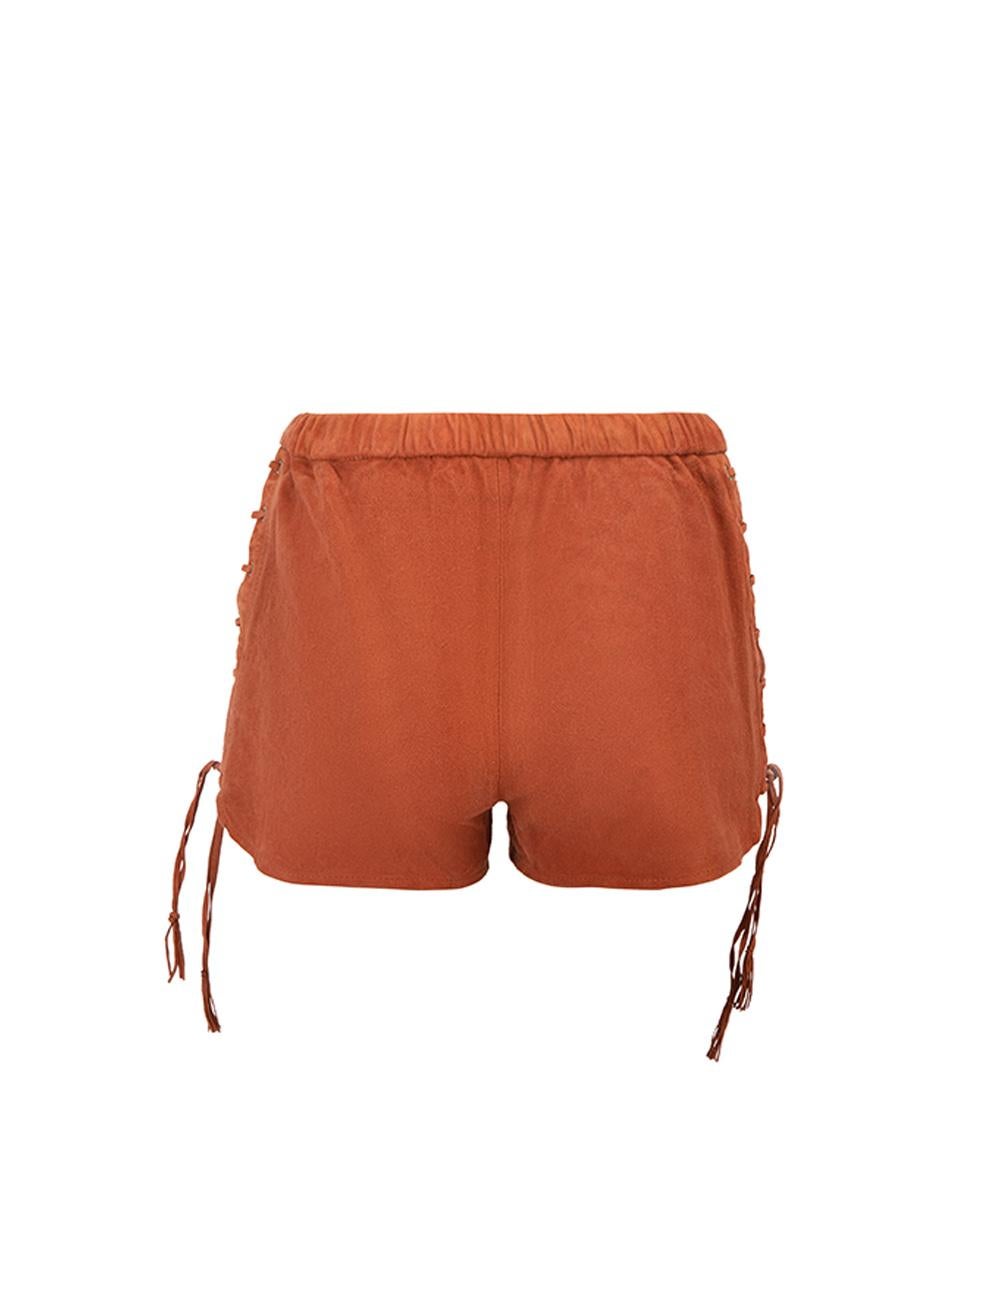 Brown Maje Women's Coral Suede Laced Accent Shorts